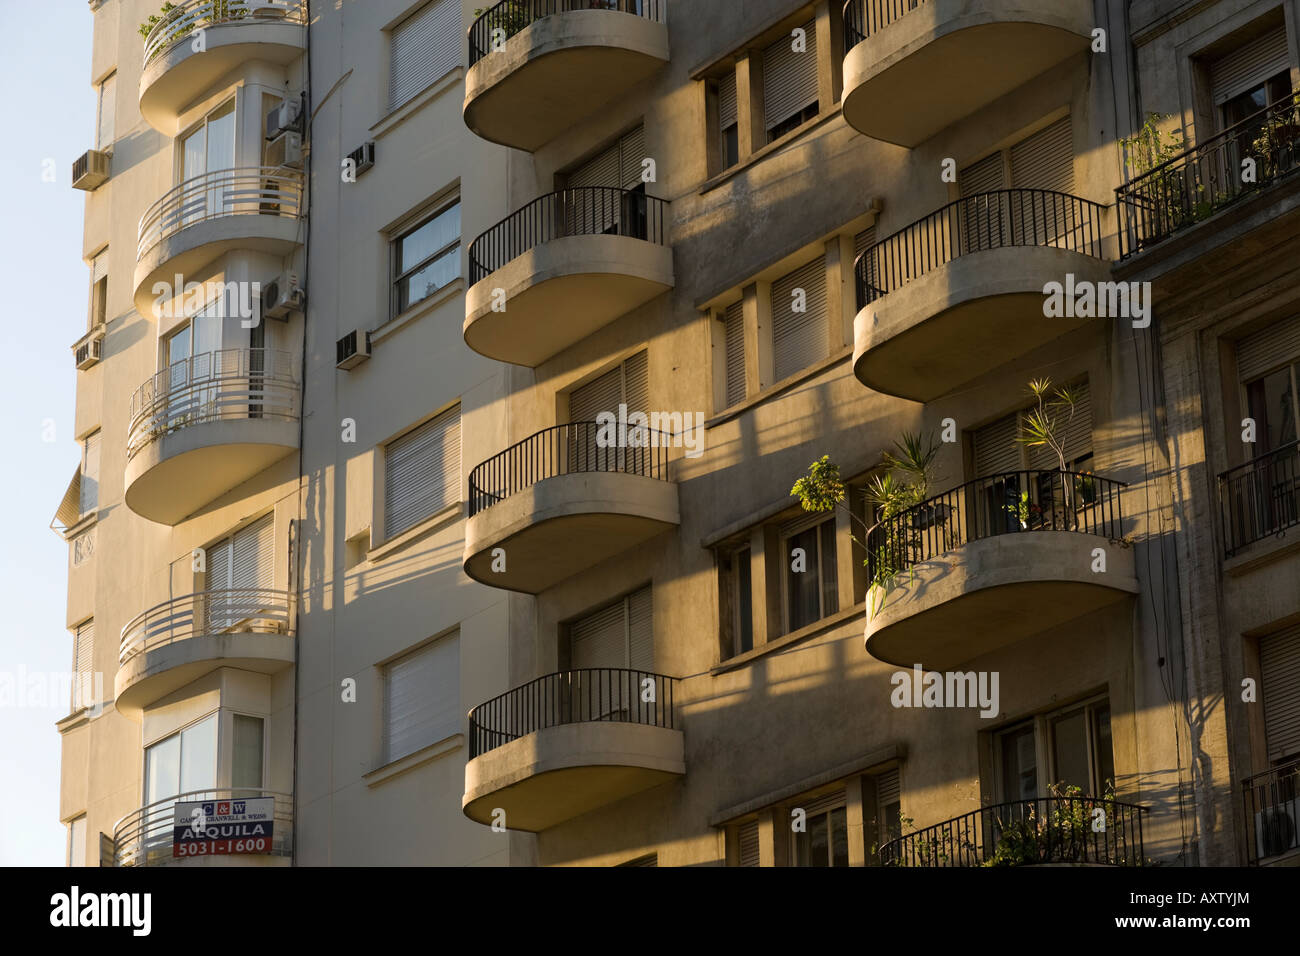 Apartments with balconies on a street in Recoleta Buenos Aires Argentina Stock Photo